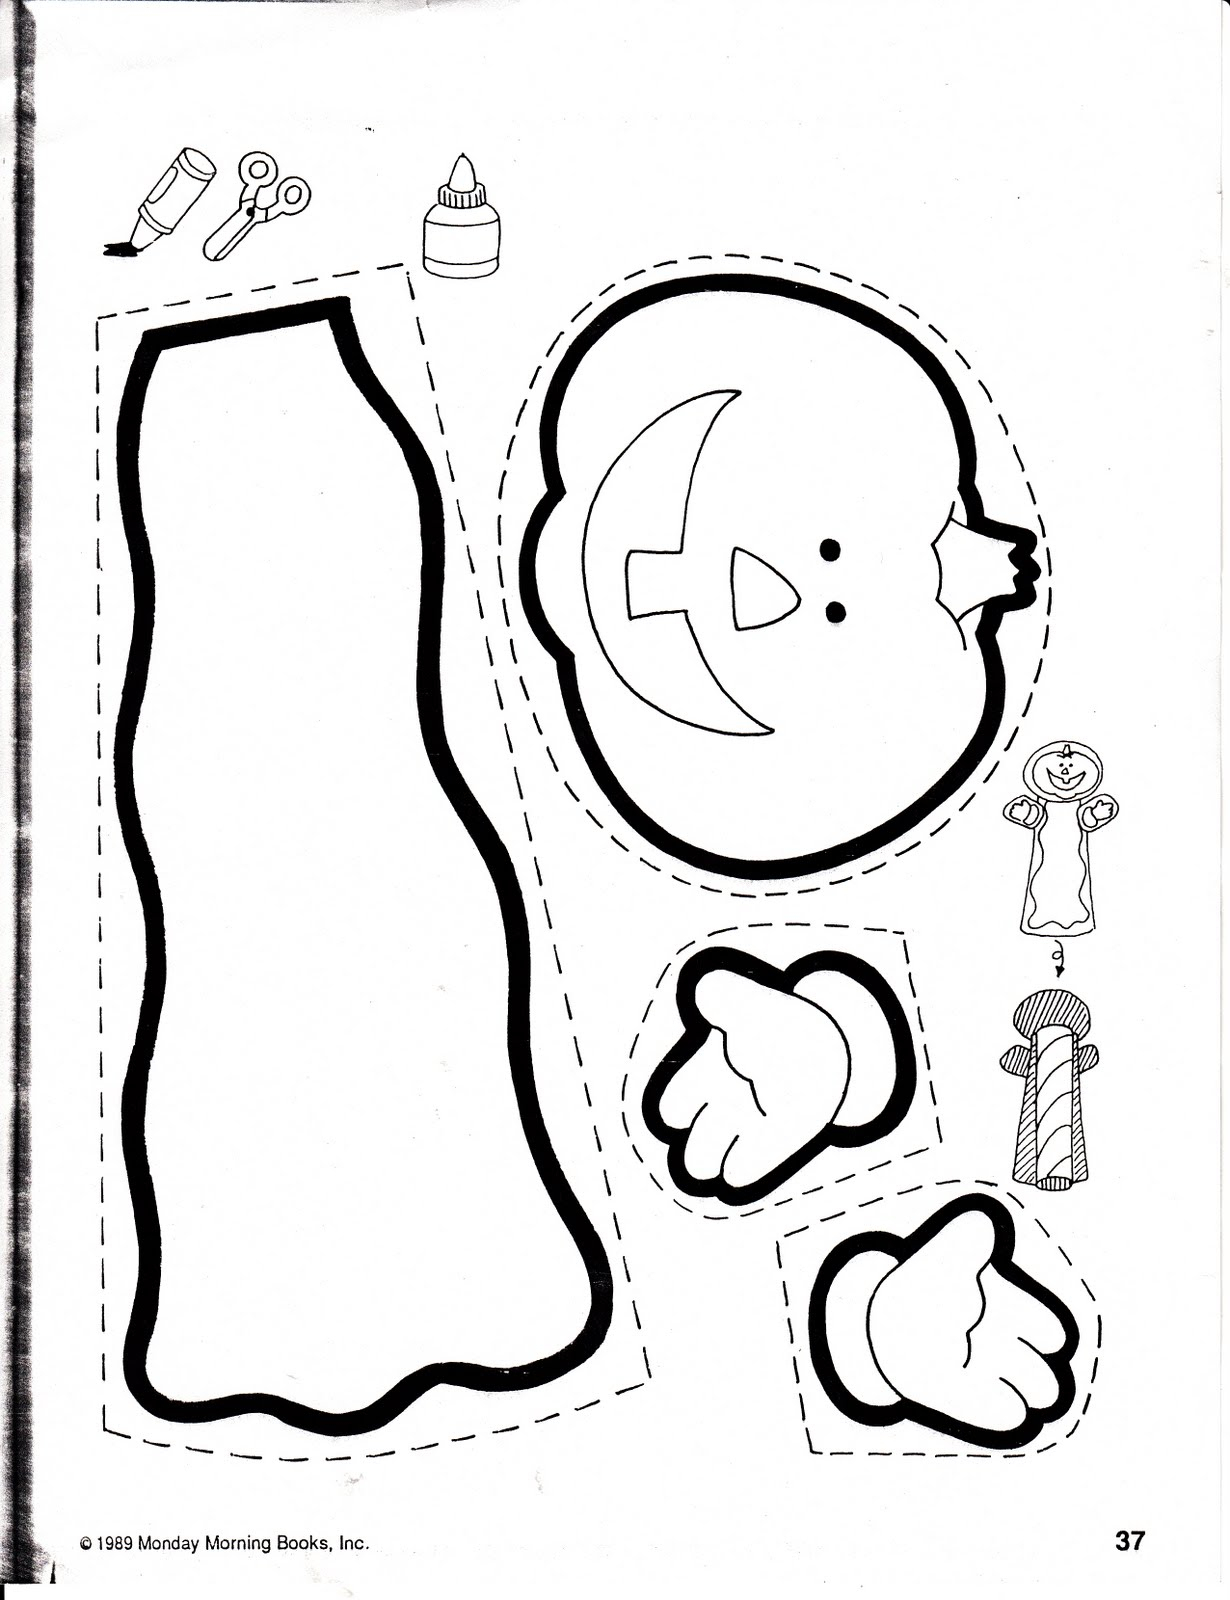 Halloween Coloring Pages Crafts - Peacereaction - Printable Halloween Cards To Color For Free